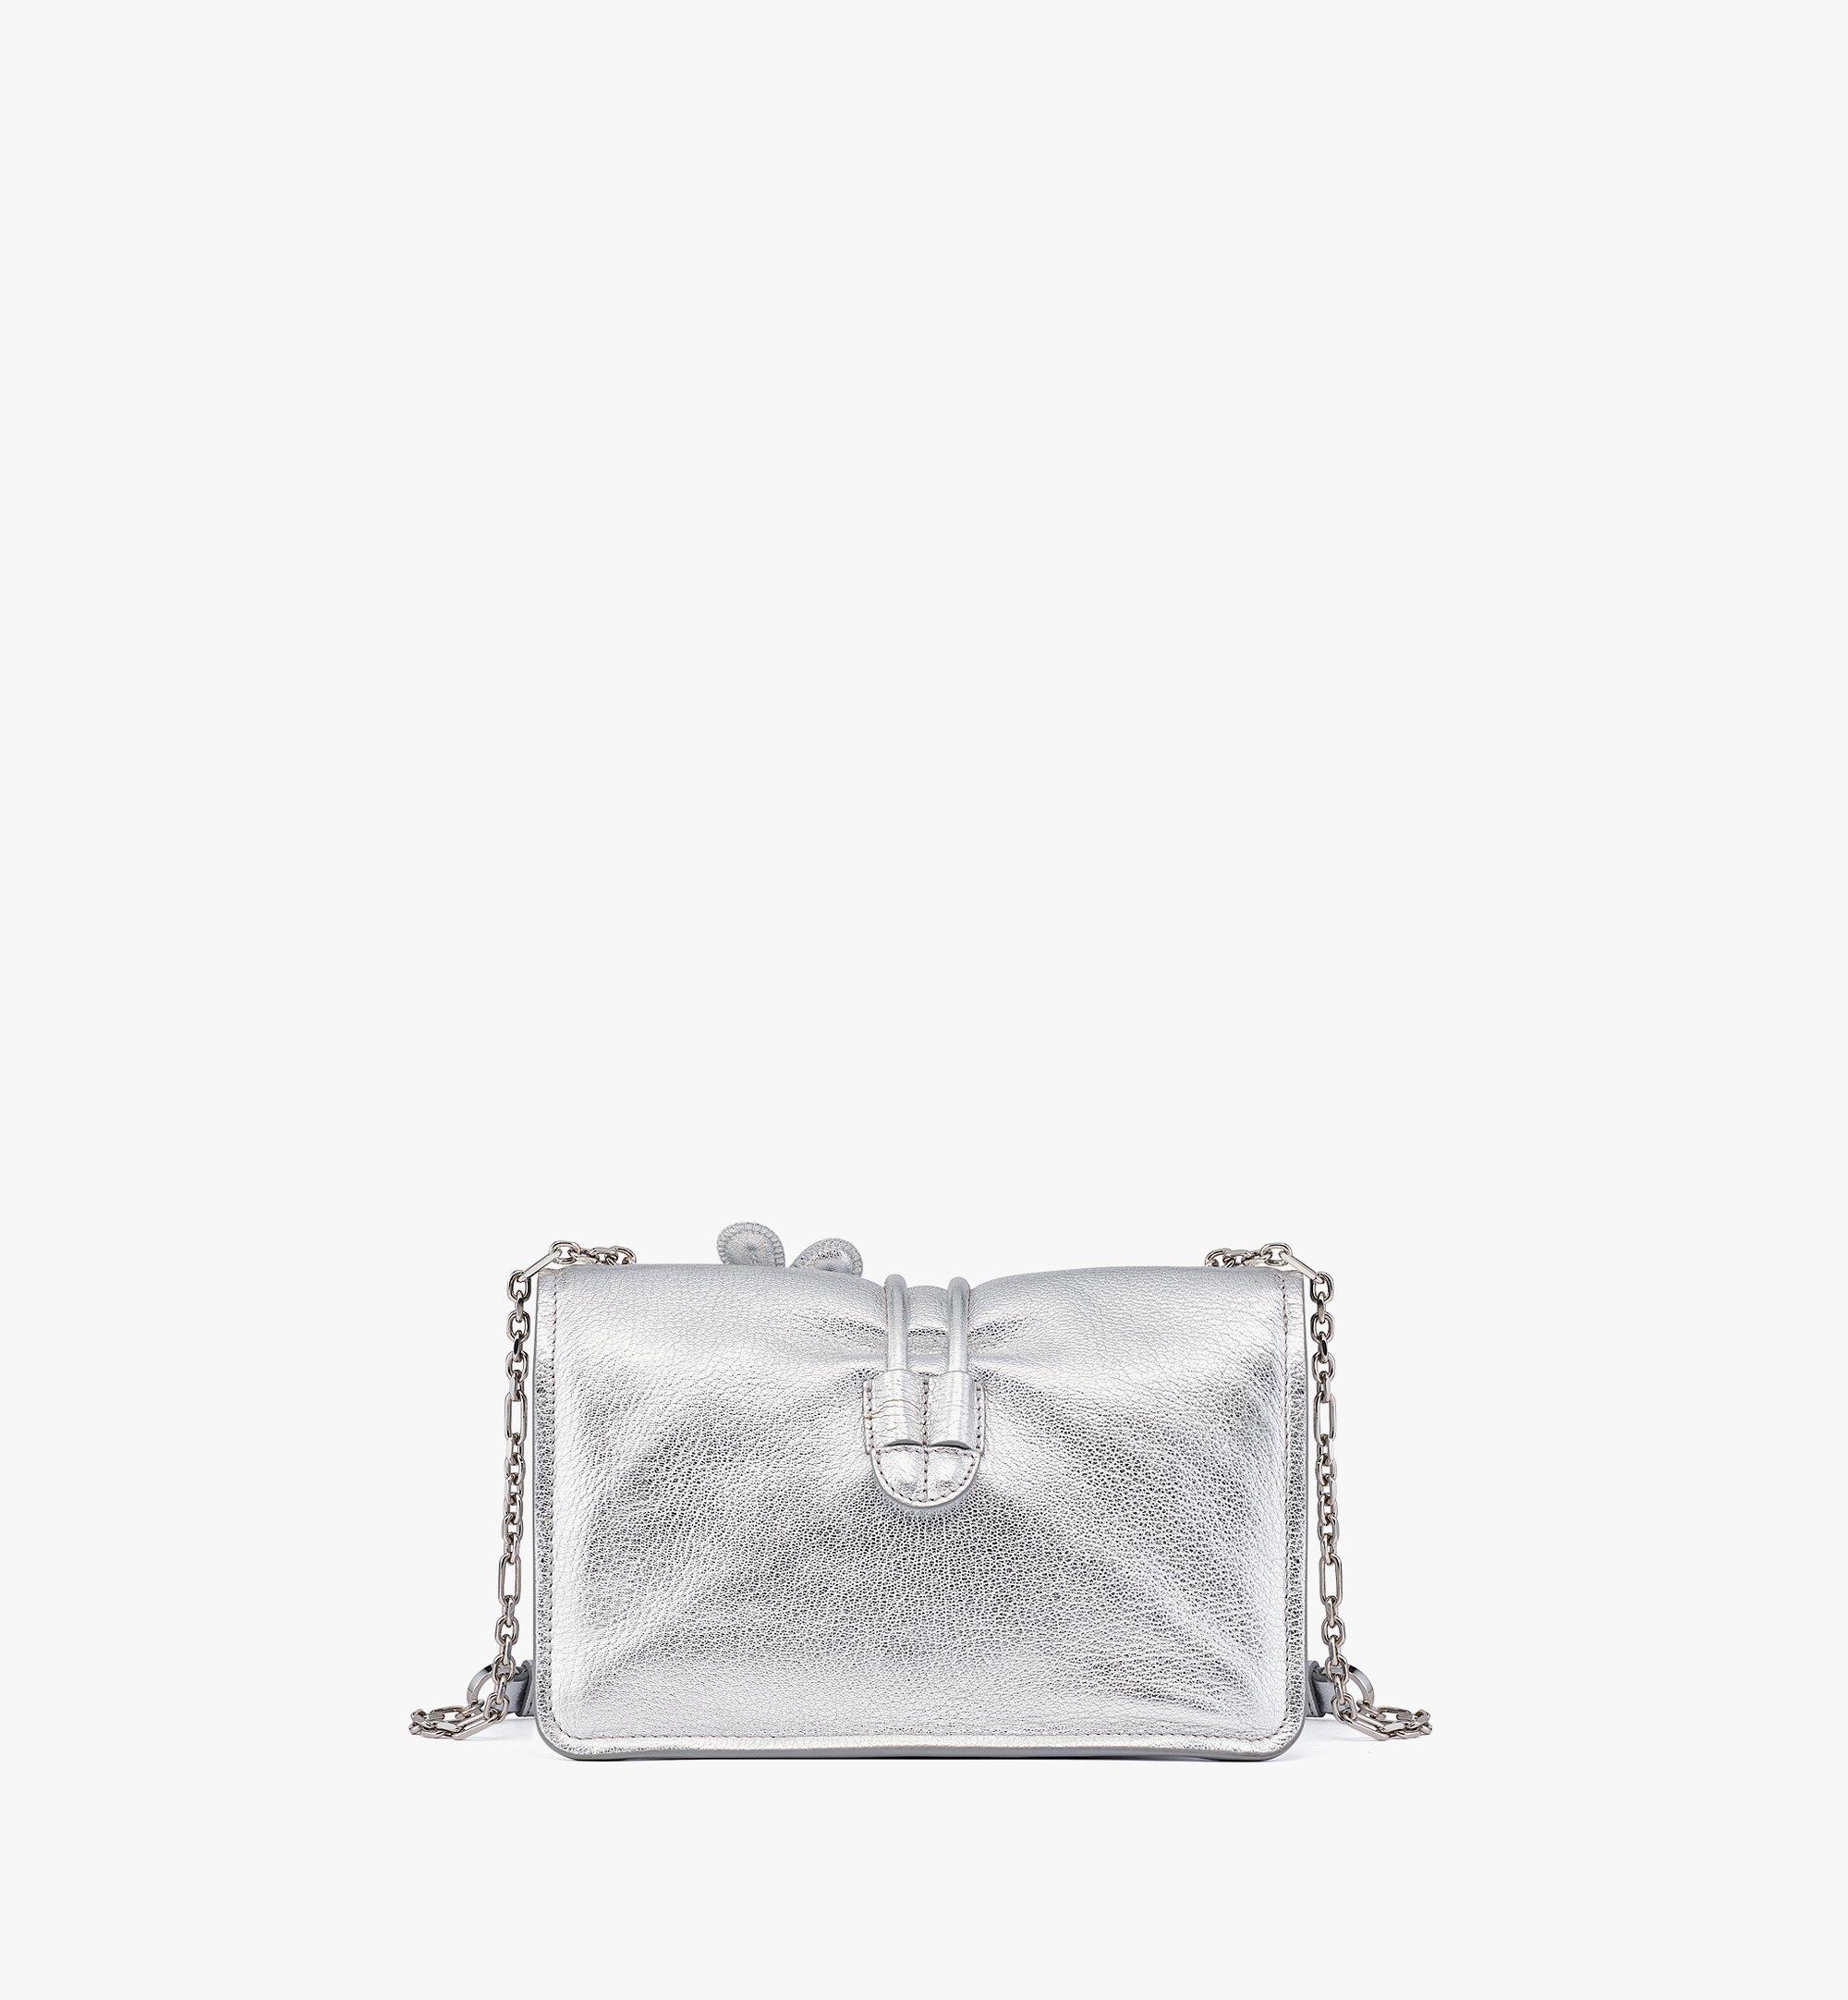 MCM Upcycling Project M Candy Shoulder Bag in Metallic Goatskin Leather Silver MWSBAUP04SE001 Alternate View 3